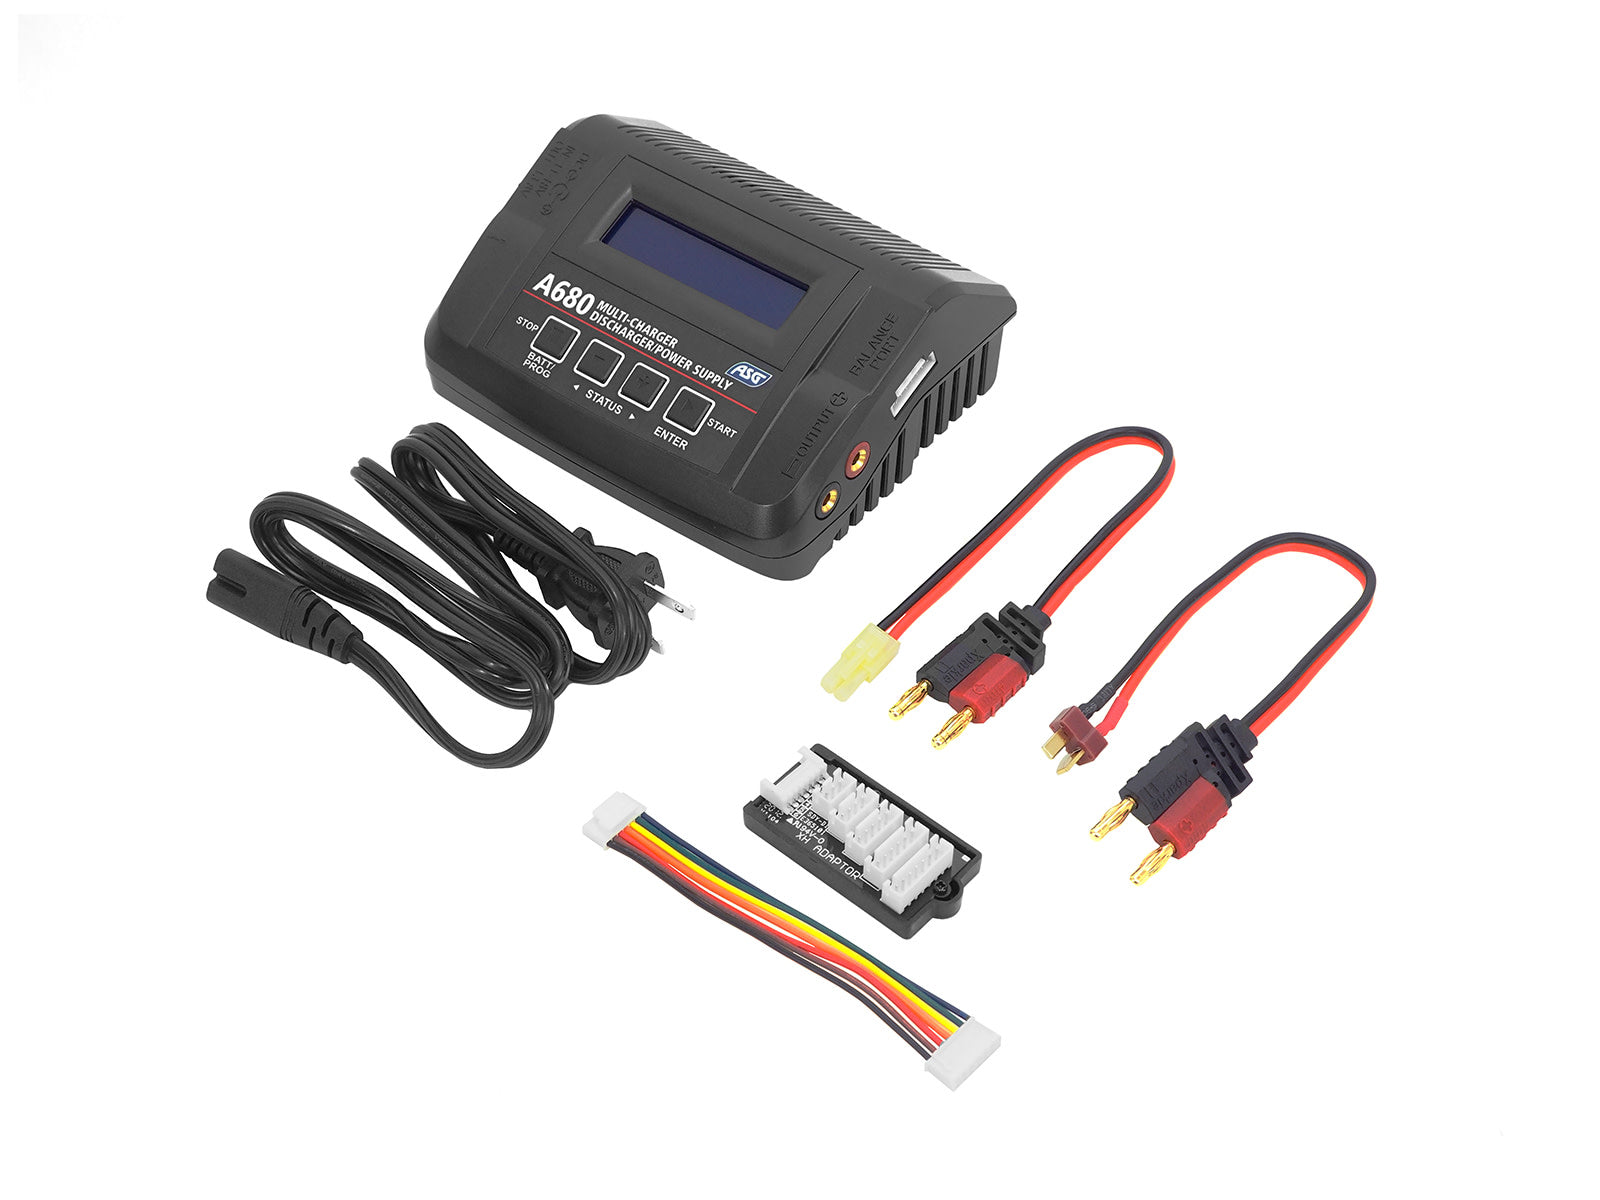 ASG A680 Charger for NiMH/LiPo/NiCd/LiFe/LiHV